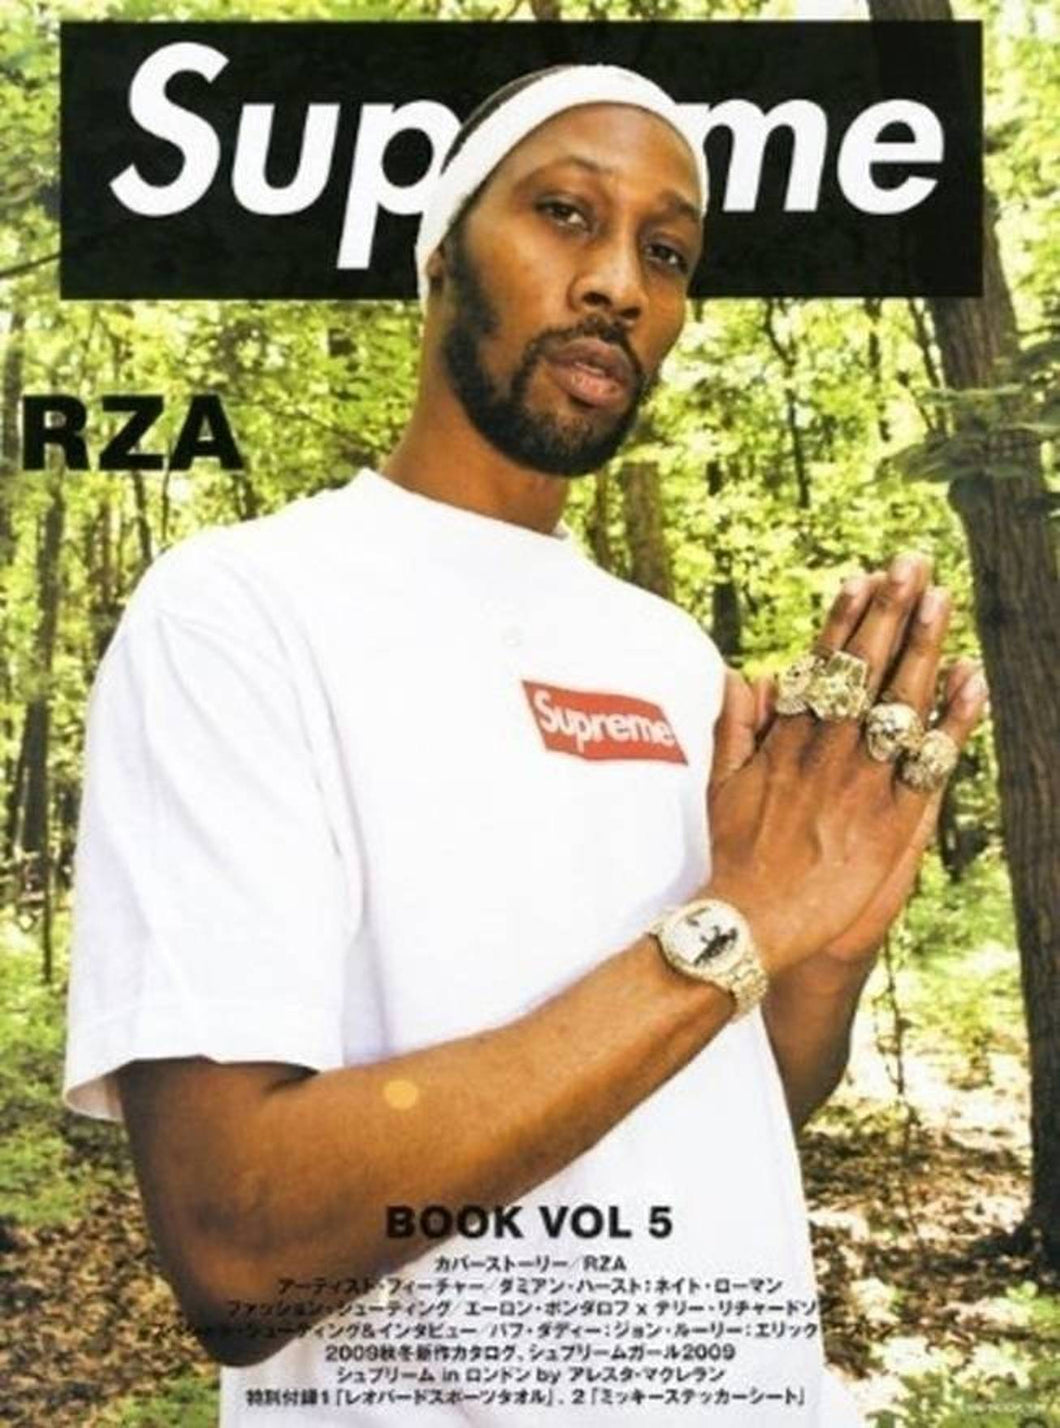 Supreme Book Vol. 5 cover featuring RZA of Wu-Tang Clan